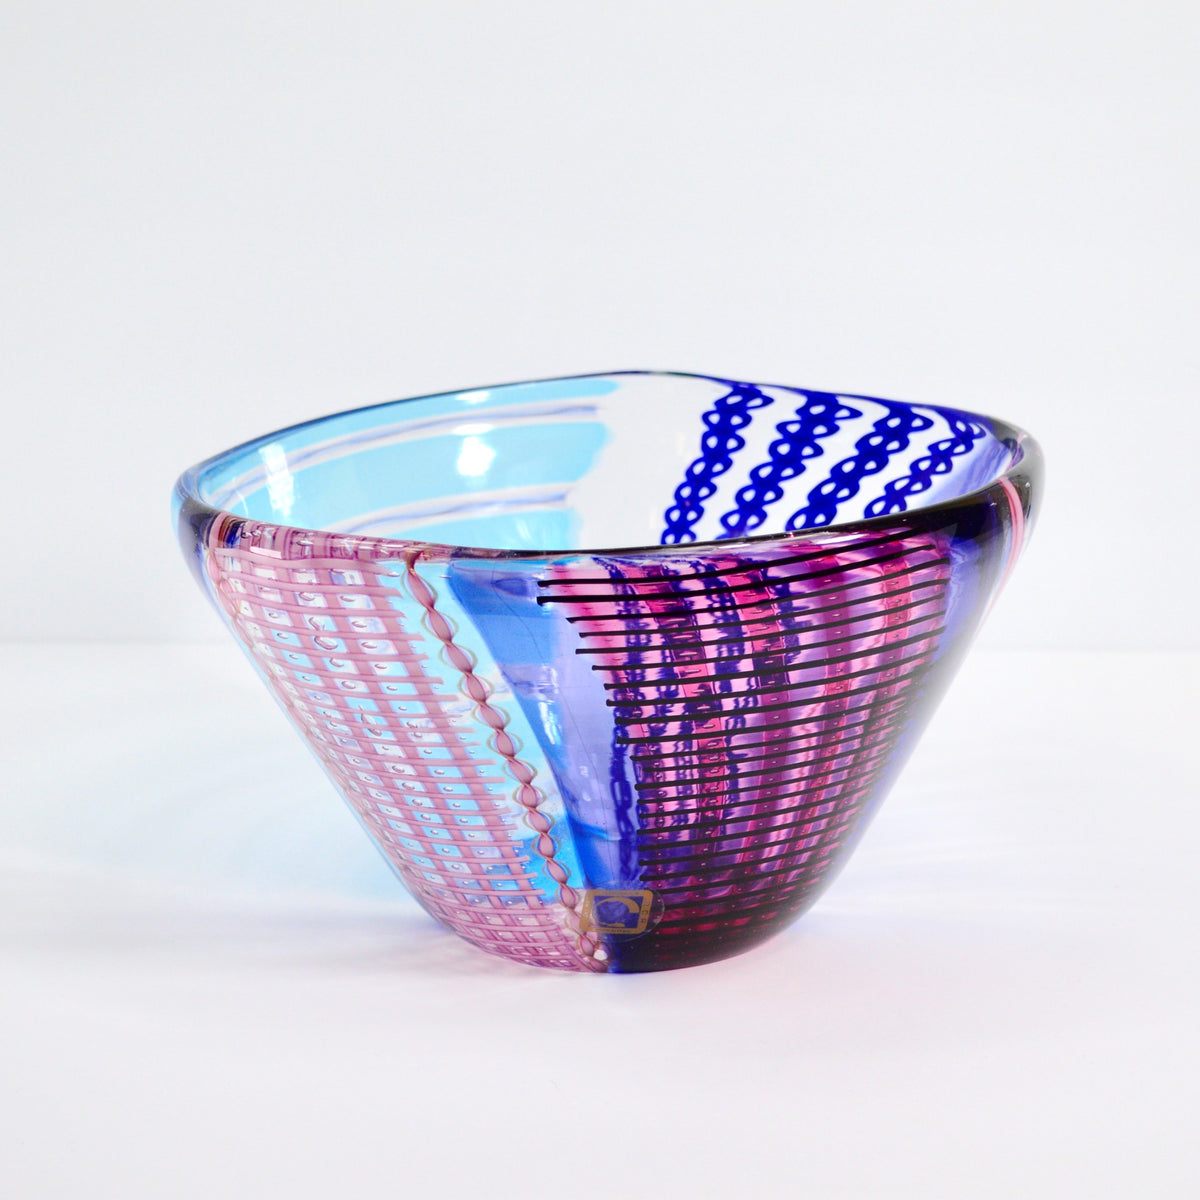 Murano Glass Large Art Centerpiece Bowl, lilac, blue, Made in Italy - My Italian Decor